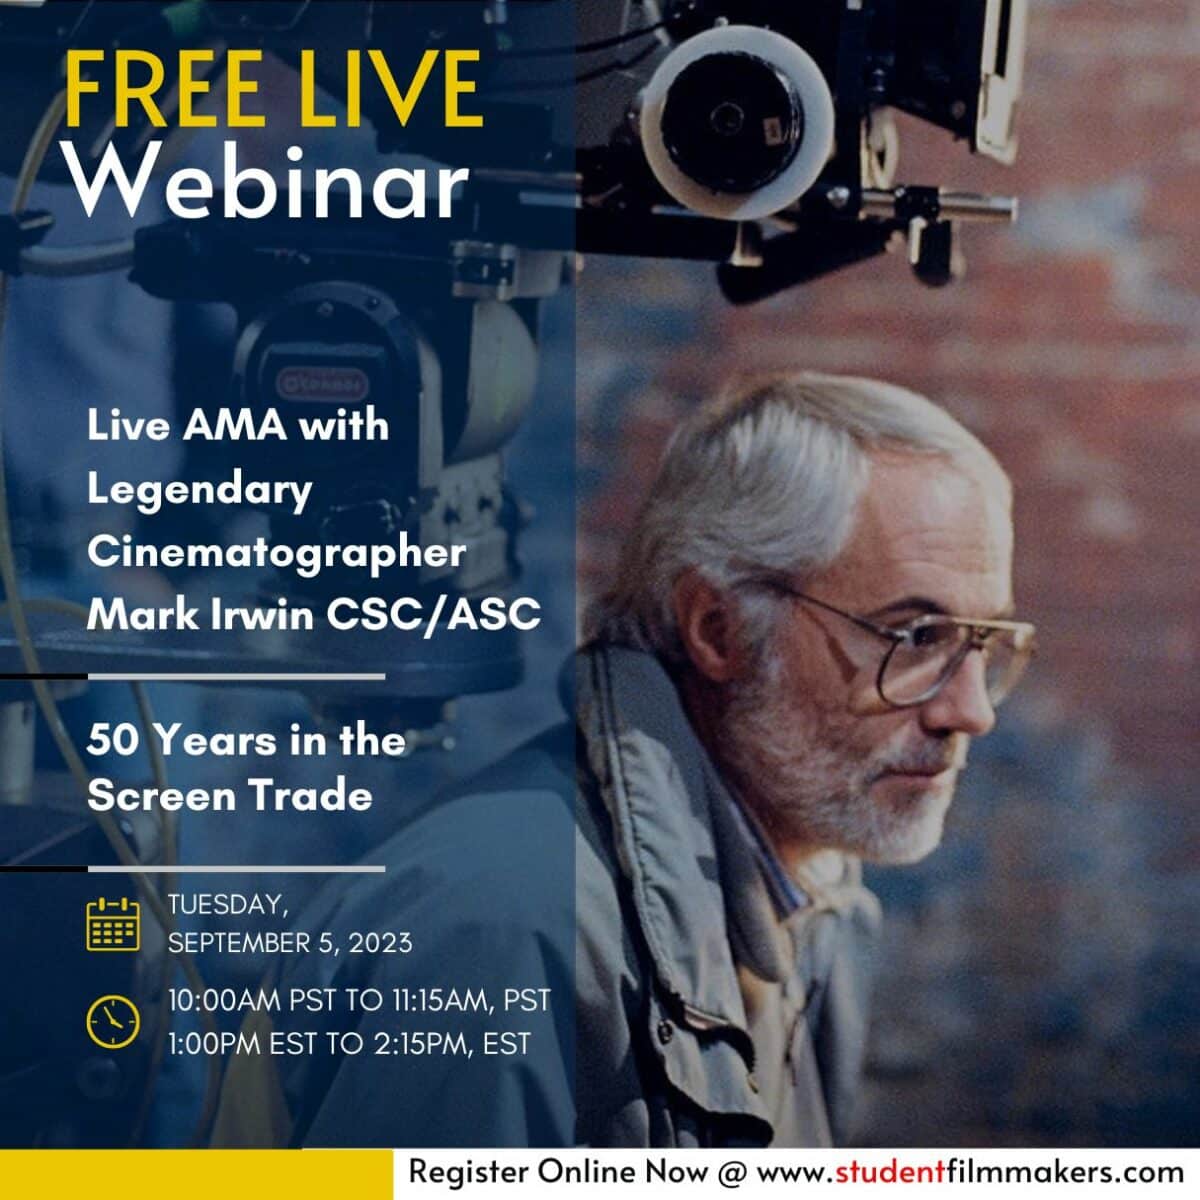 Live AMA with Legendary Cinematographer Mark Irwin CSC/ASC 50 Years in the Screen Trade